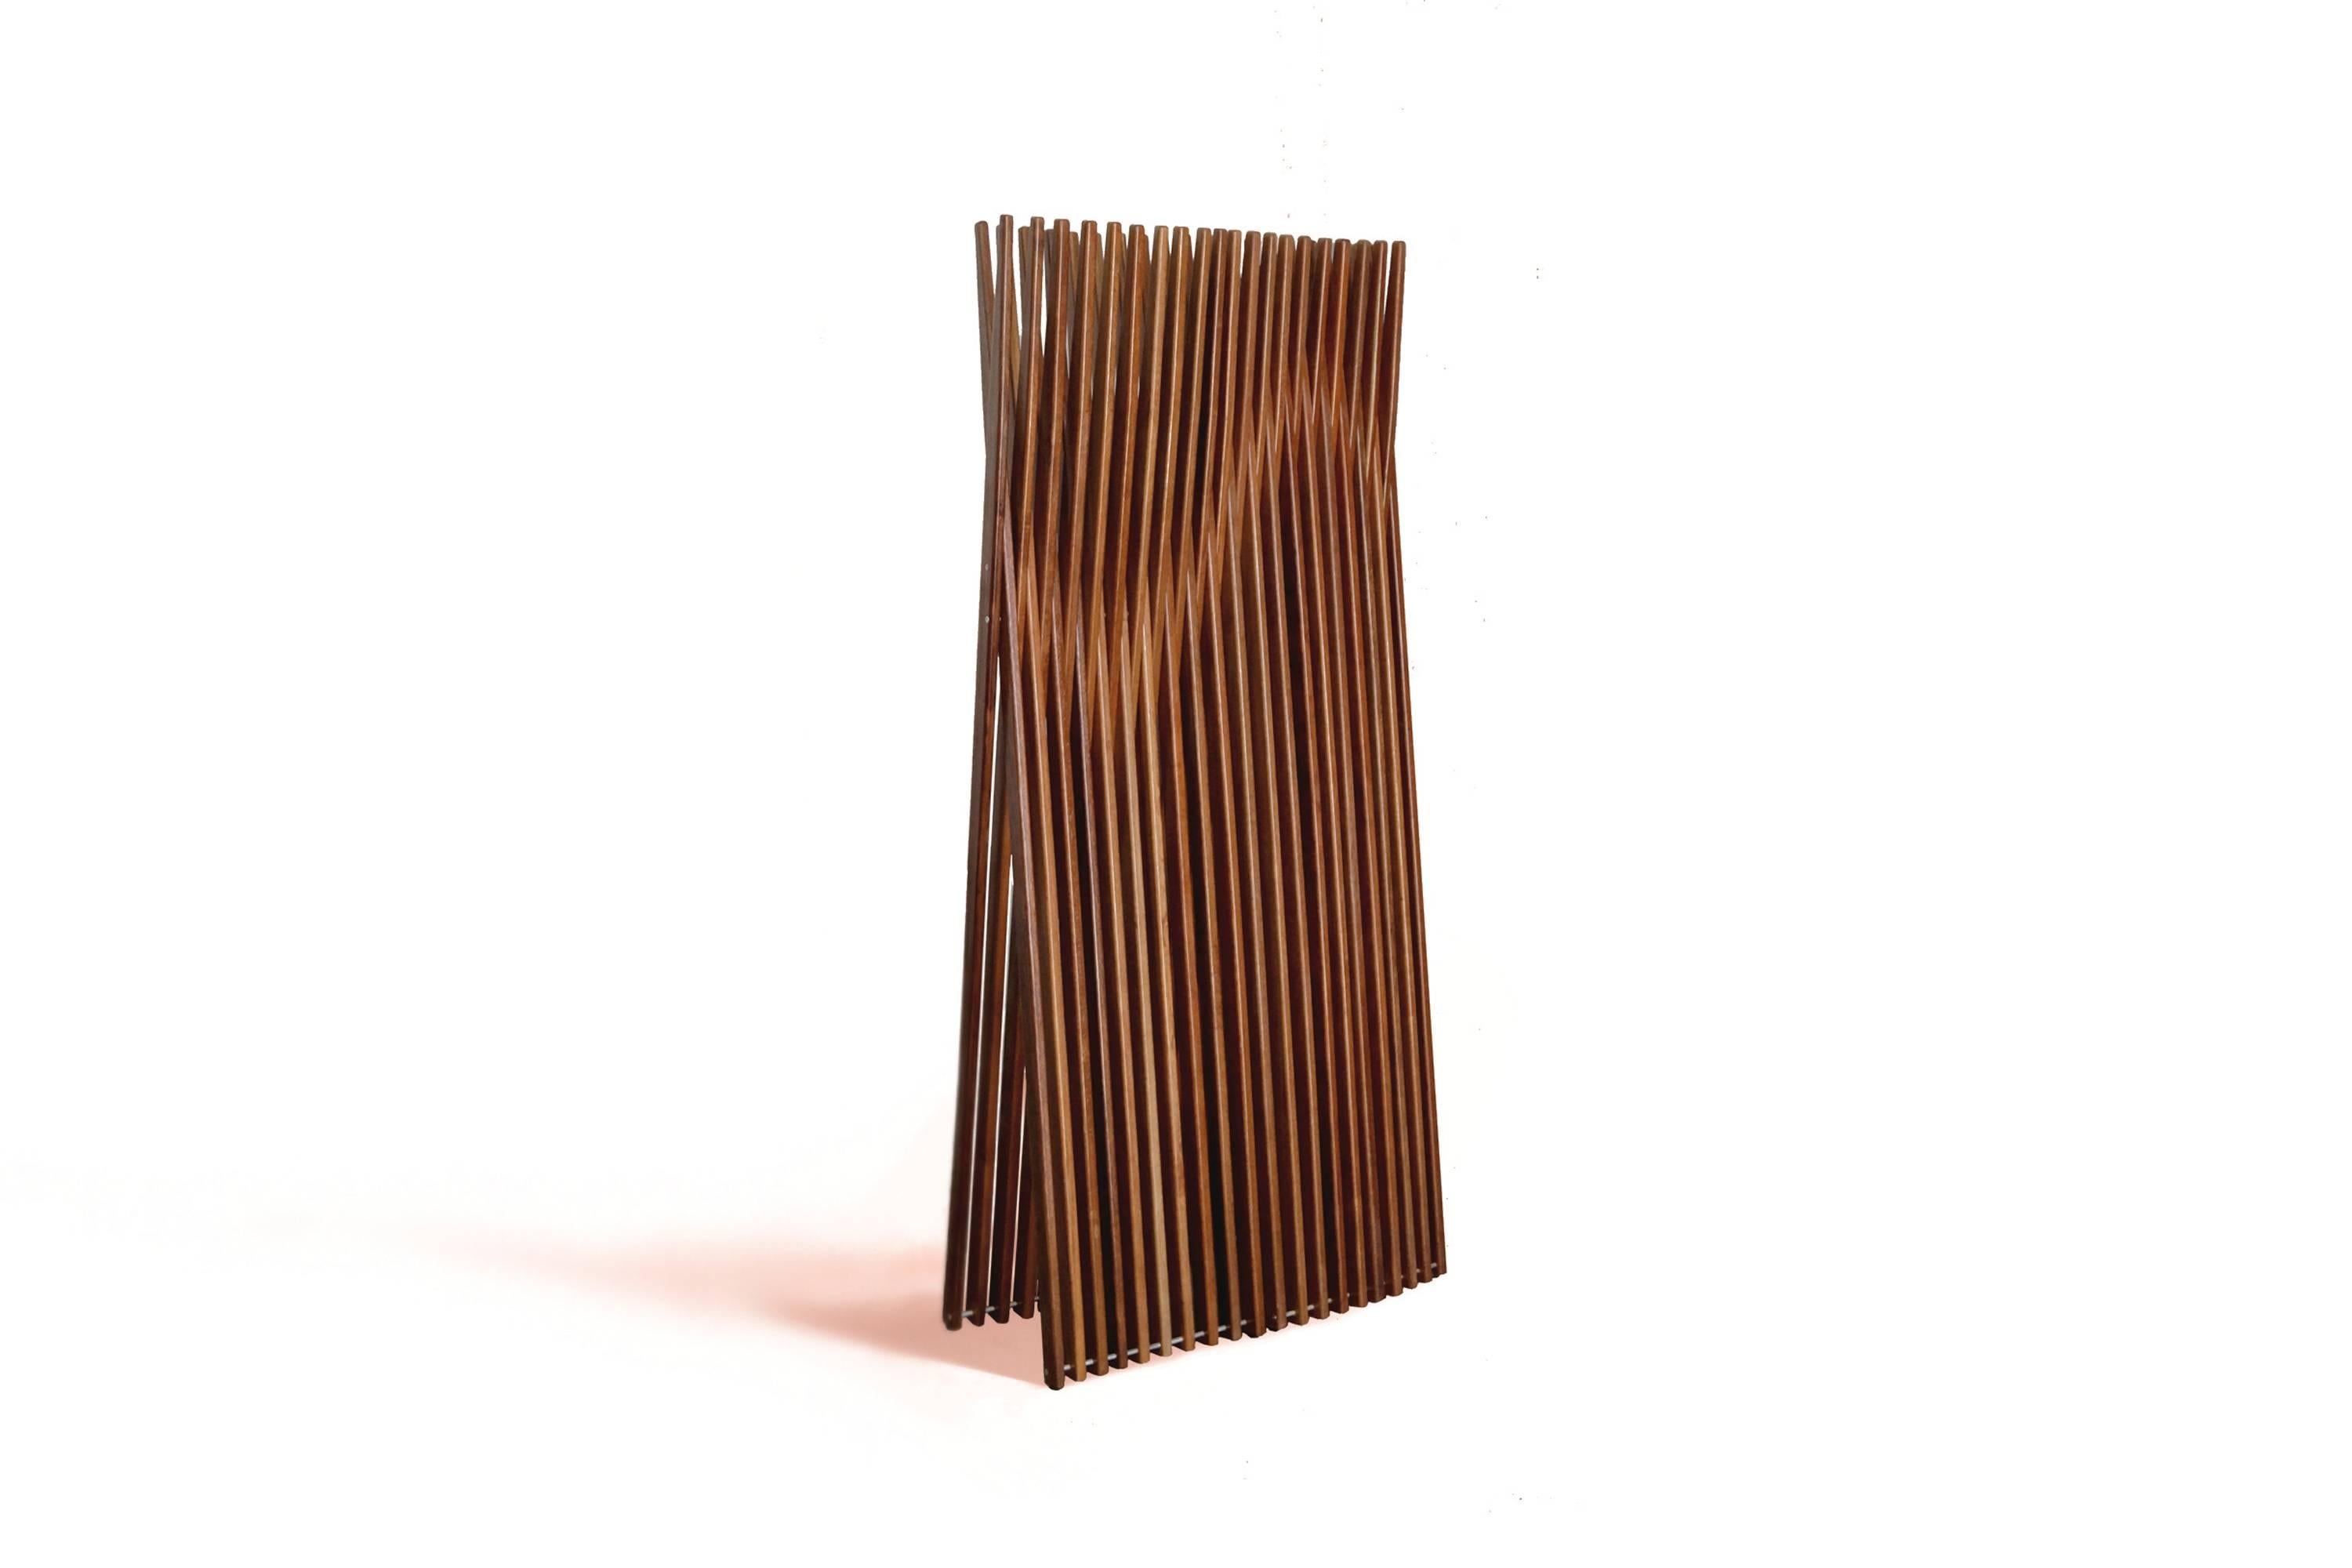 This contemporary styled partition screen or room divider is made of sucupira hardwood. Named the Conogó, this partition screen is art–furniture.

The  constructive and aesthetic inspiration for this room divider is a mix of references that goes